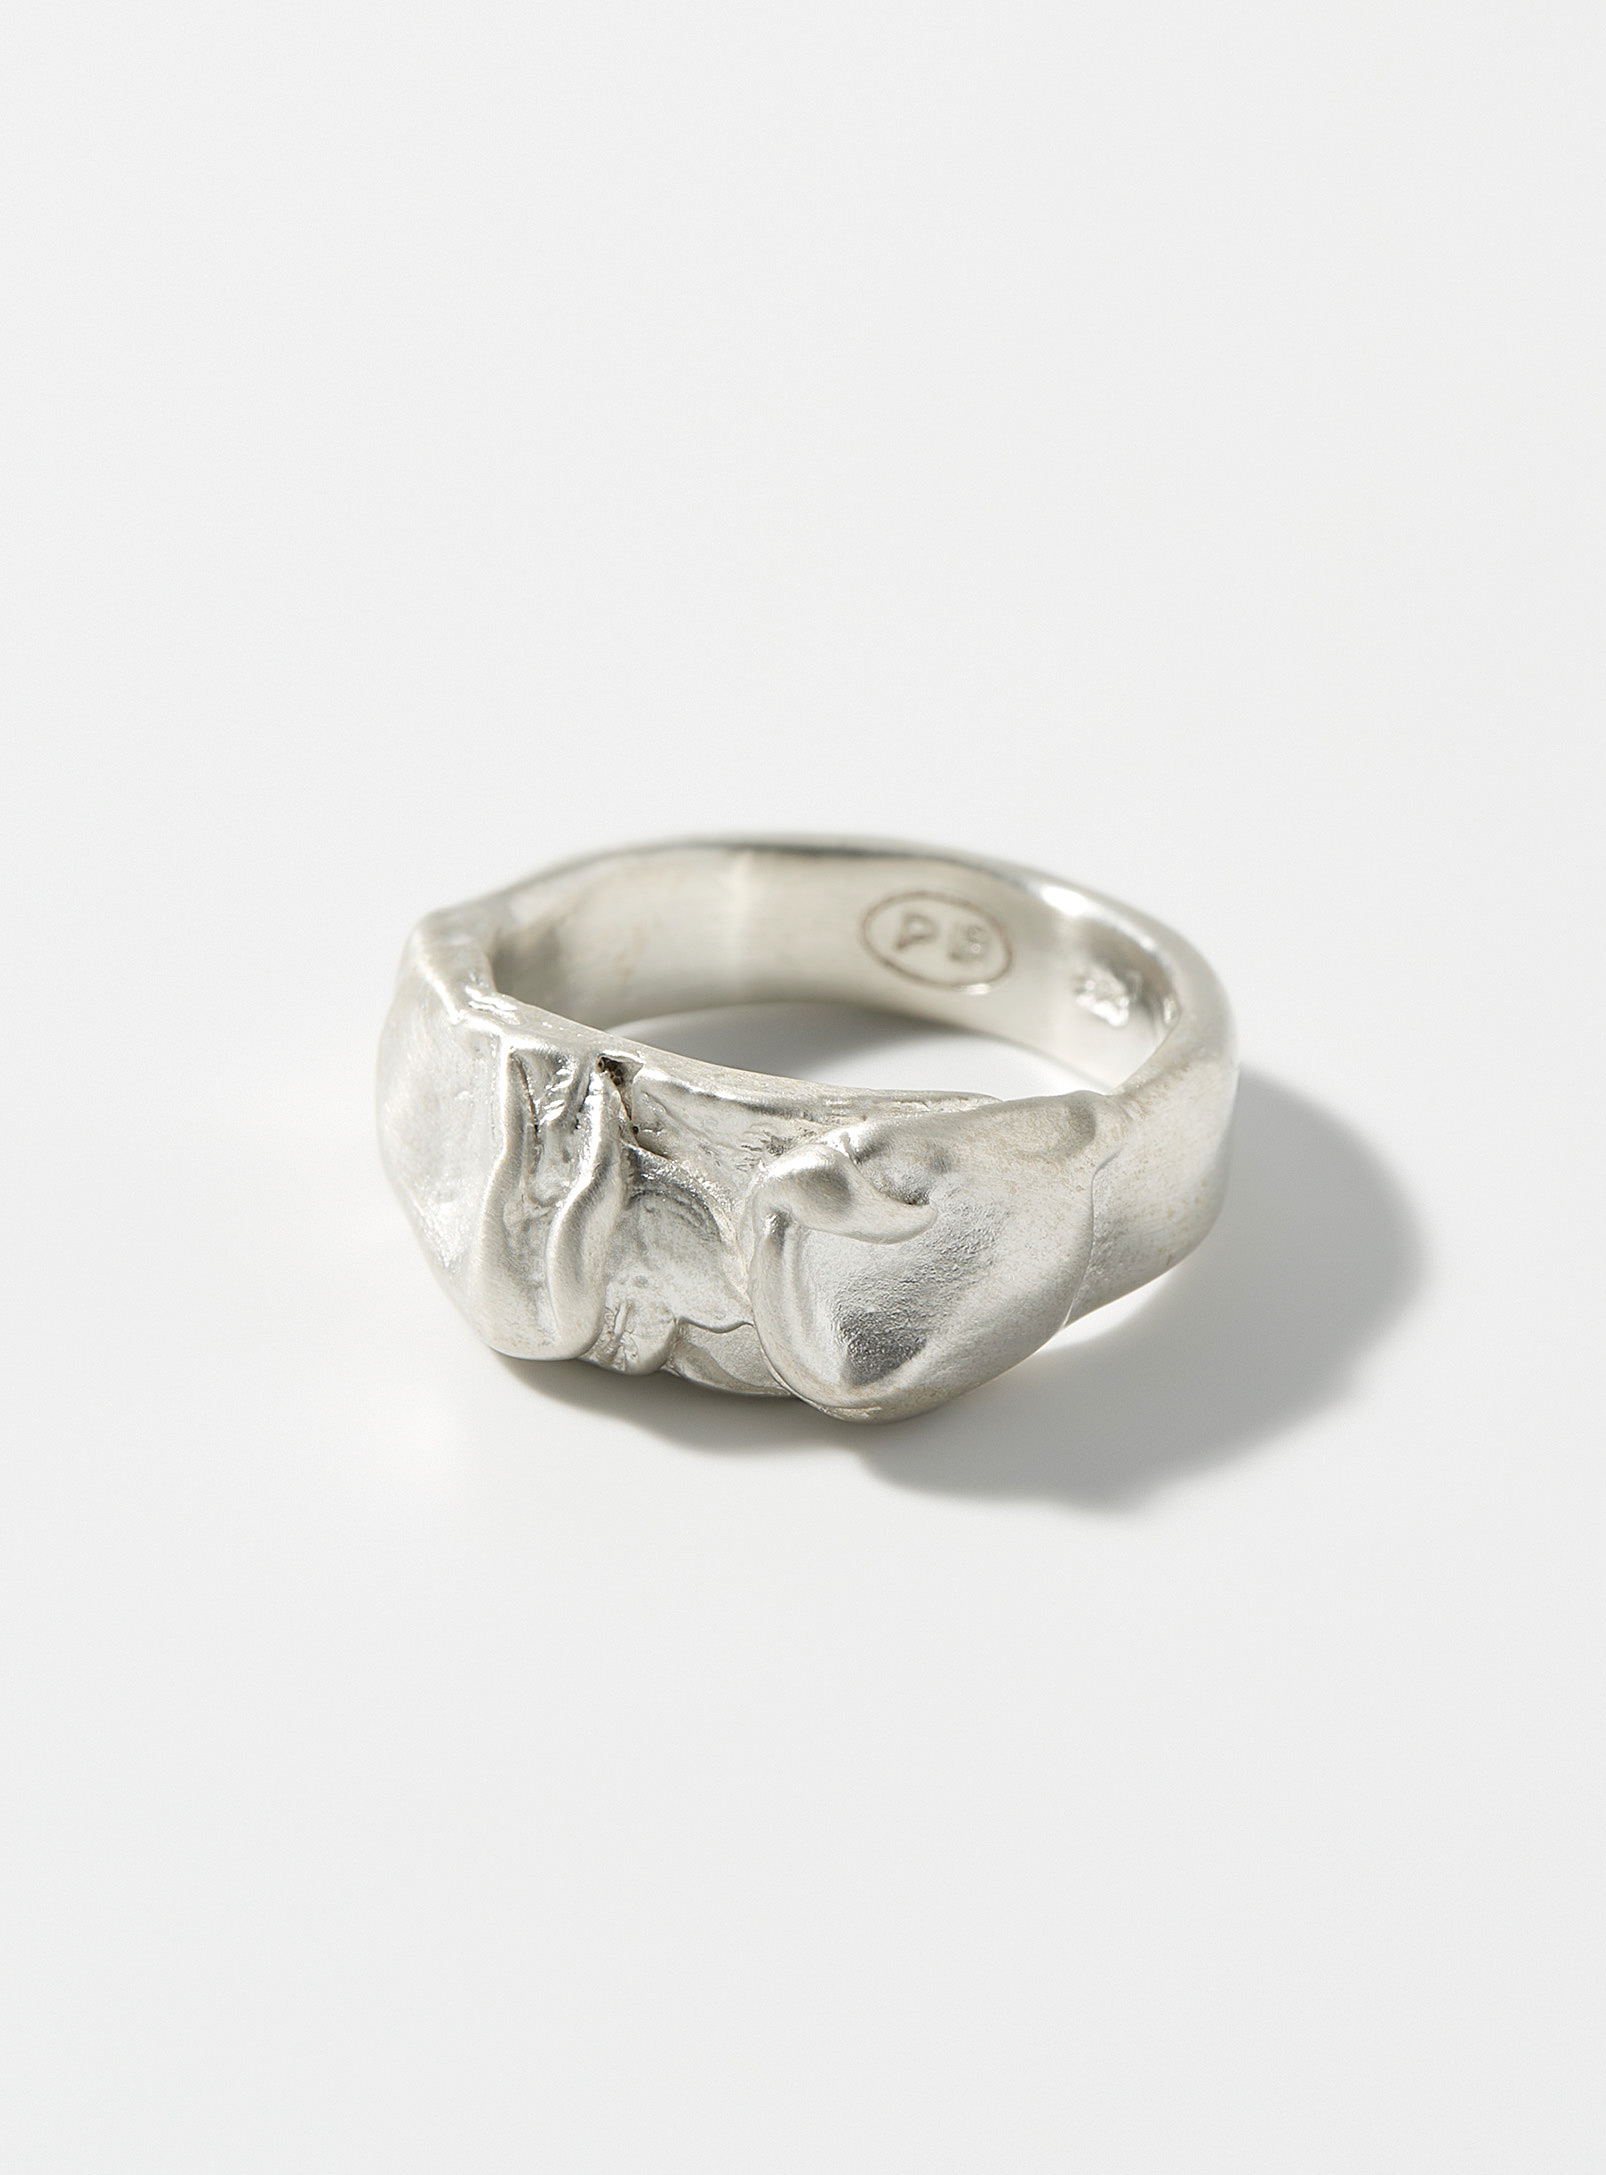 Paul Edward Melted Sterling Silver Ring